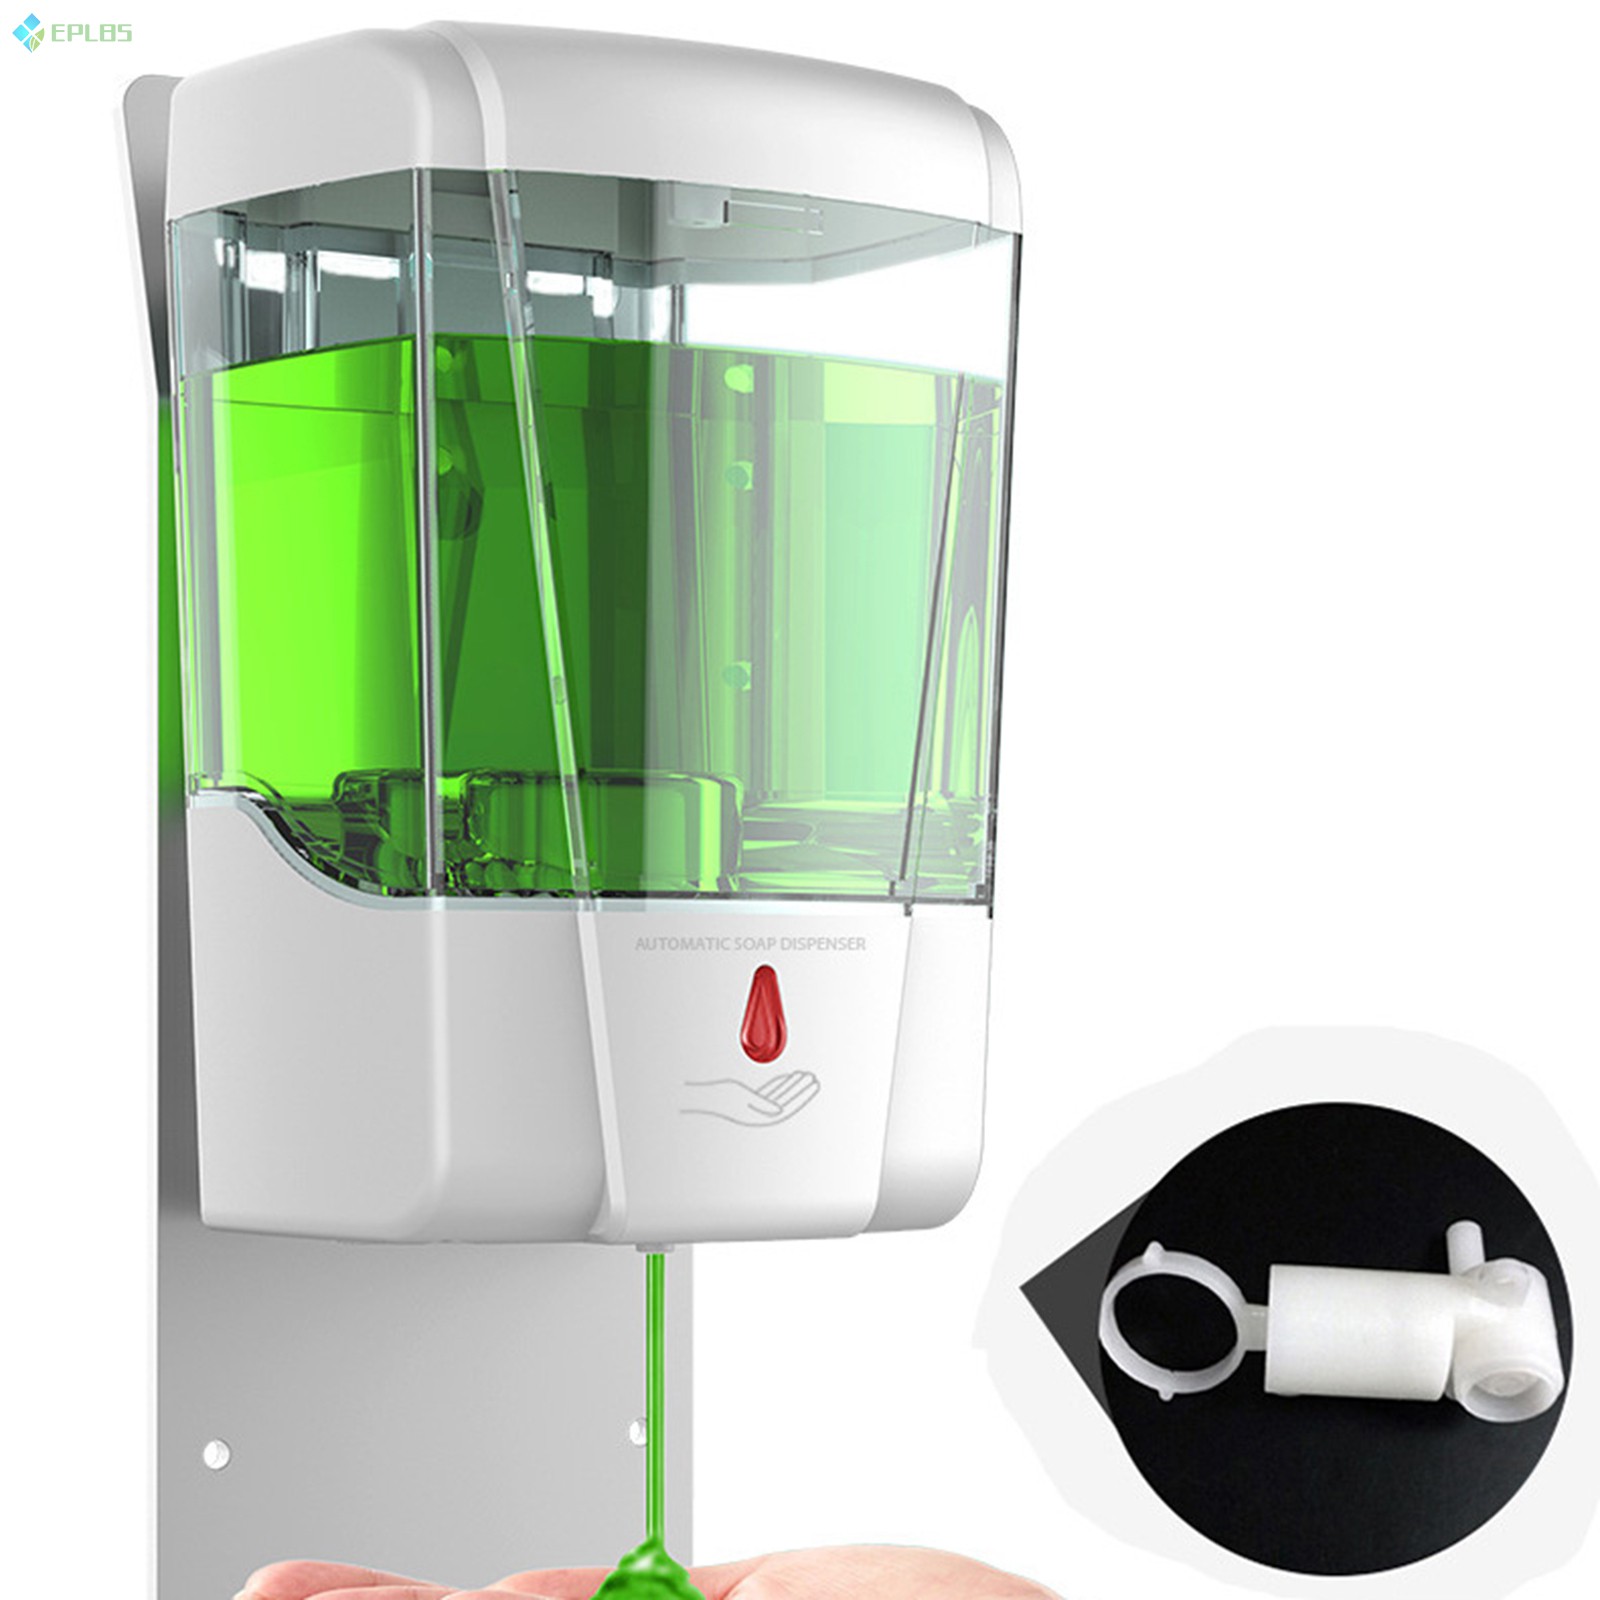 EPLBS 700ml Automatic Sensor Soap Dispenser Touchless Wall Mounted Liquid Soap Home Bathroom